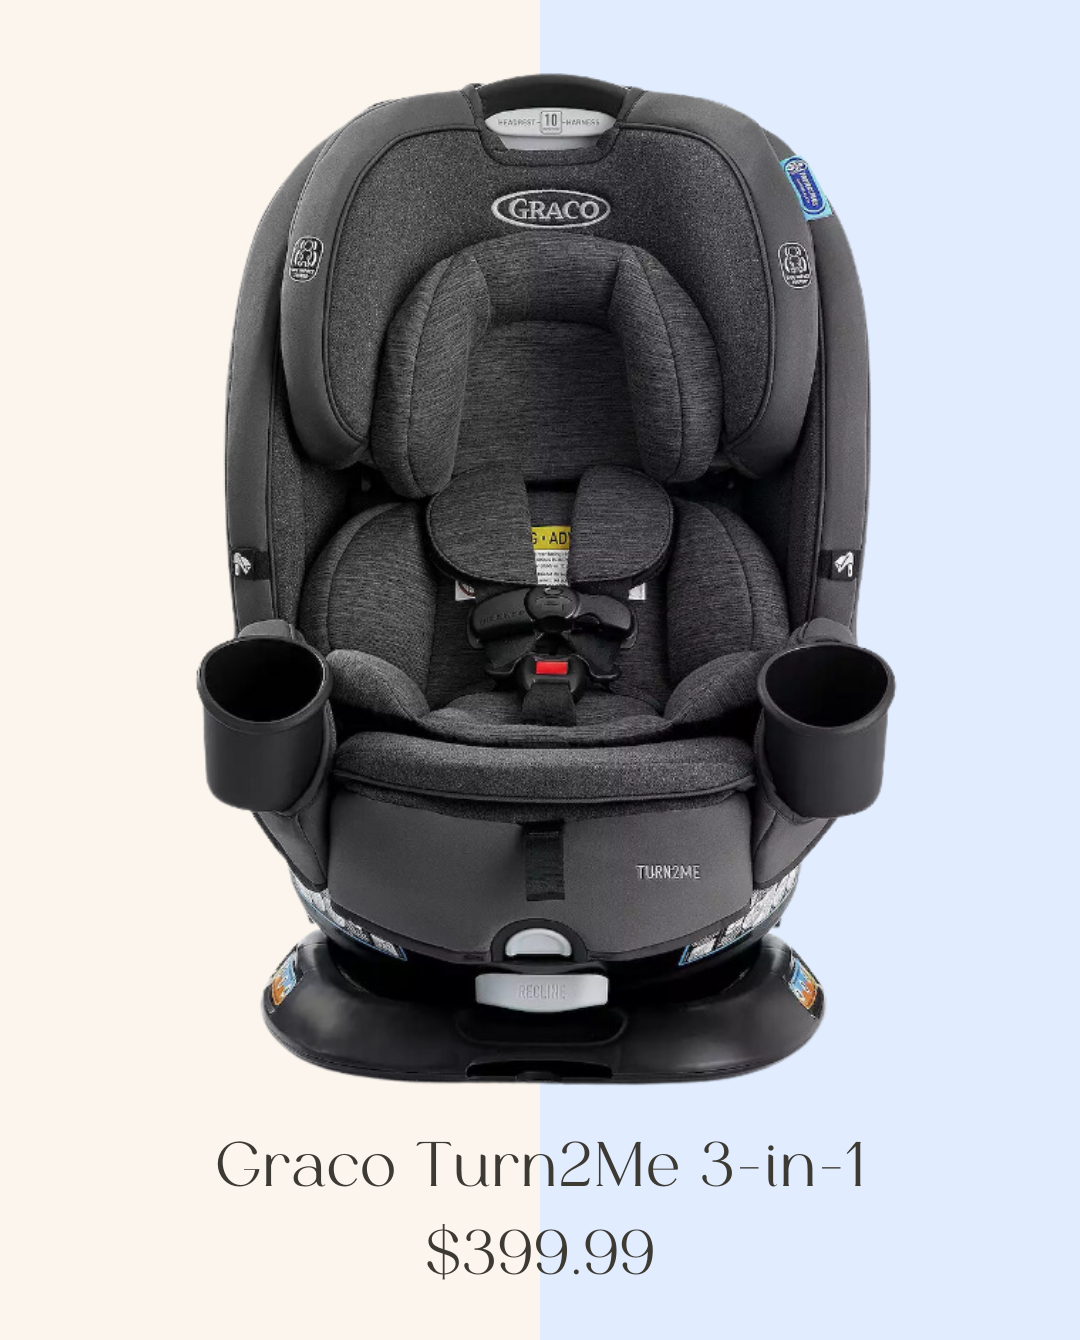 Top Parent Picks: The 6 Best Toddler Car Seats - Graco Turn2Me 3-in-1